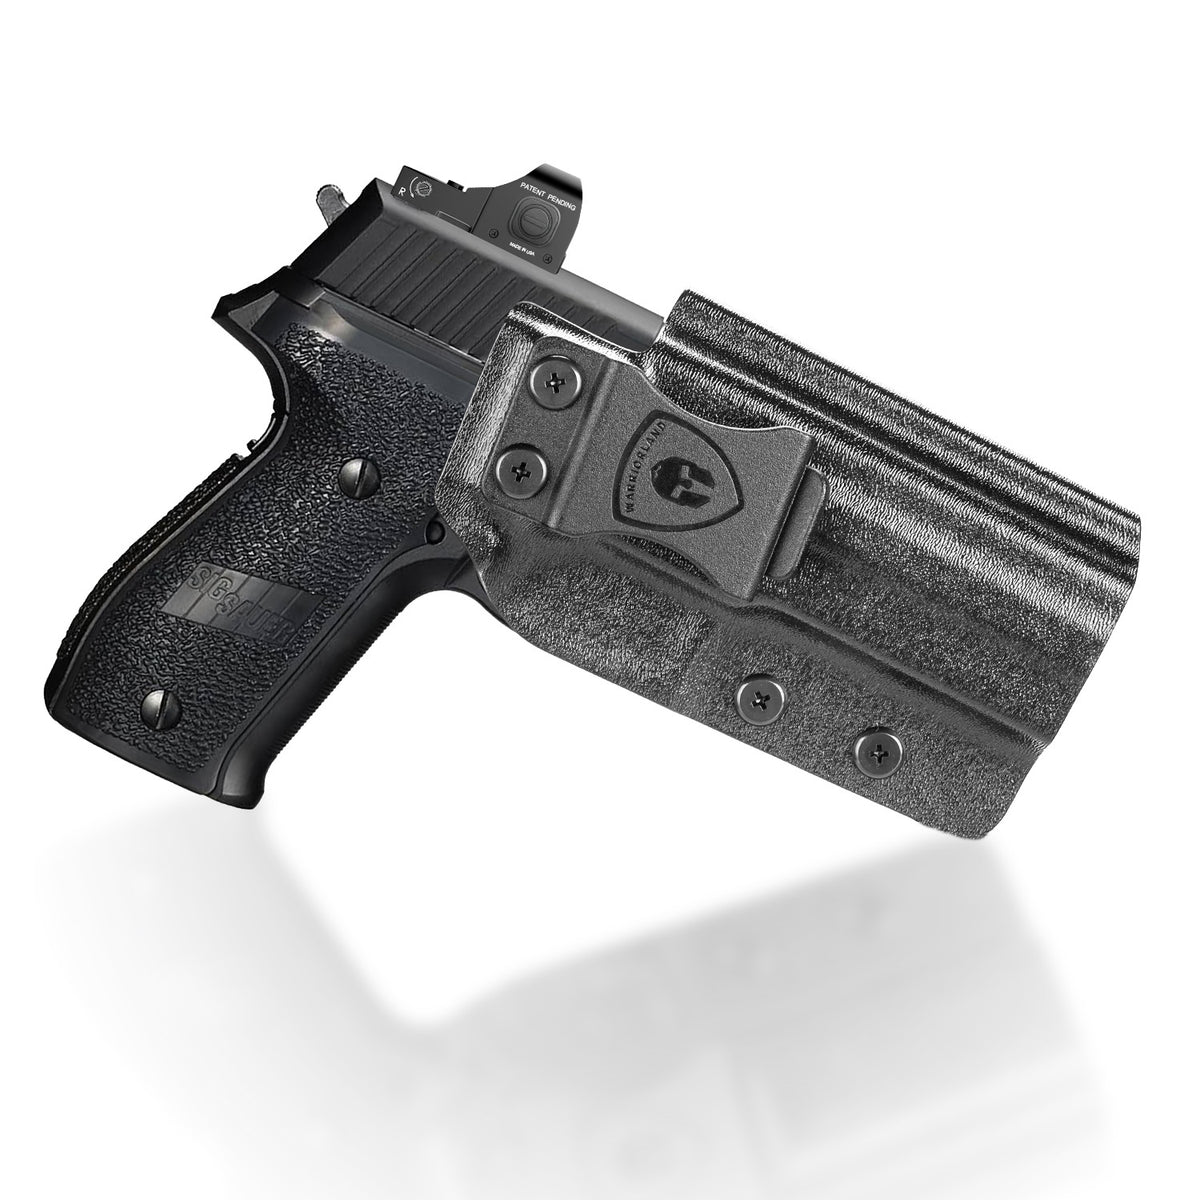 P226 Holster IWB Kydex Holster Optics Cut for P226 Full Size 4.4'' Barrel, Inside Waistband Appendix Concealed Carry Holster P226, Adj. Cant & Posi-Click Retention, Right Hand/Left Hand Optional